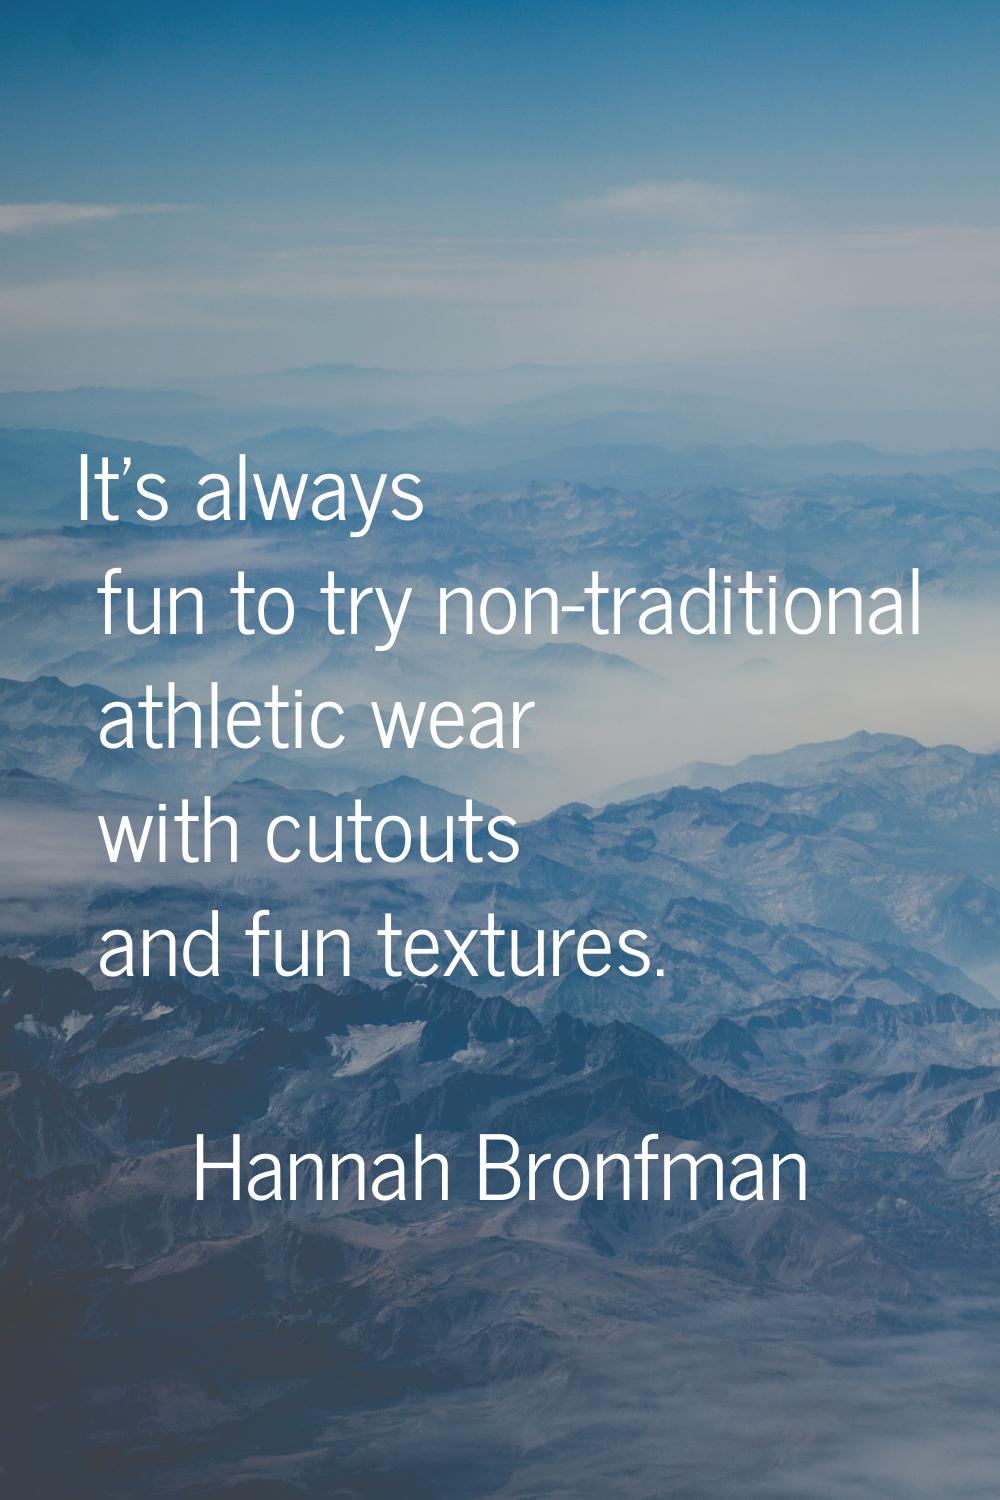 It's always fun to try non-traditional athletic wear with cutouts and fun textures.